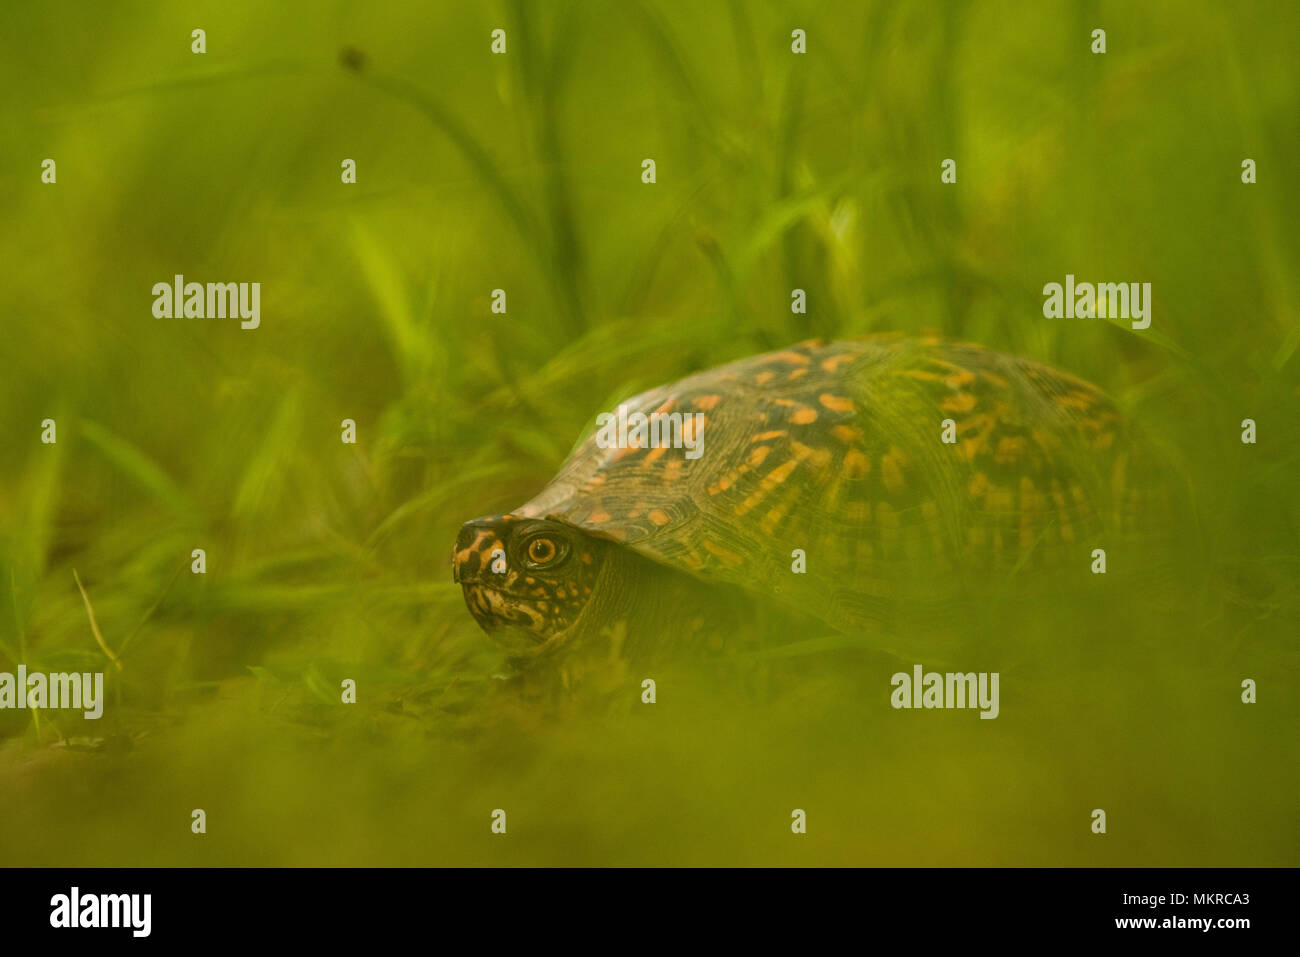 A common box turtle (Terrapene carolina) photographed at a low angle in long grass. Still common, this species is experiencing population declines. Stock Photo